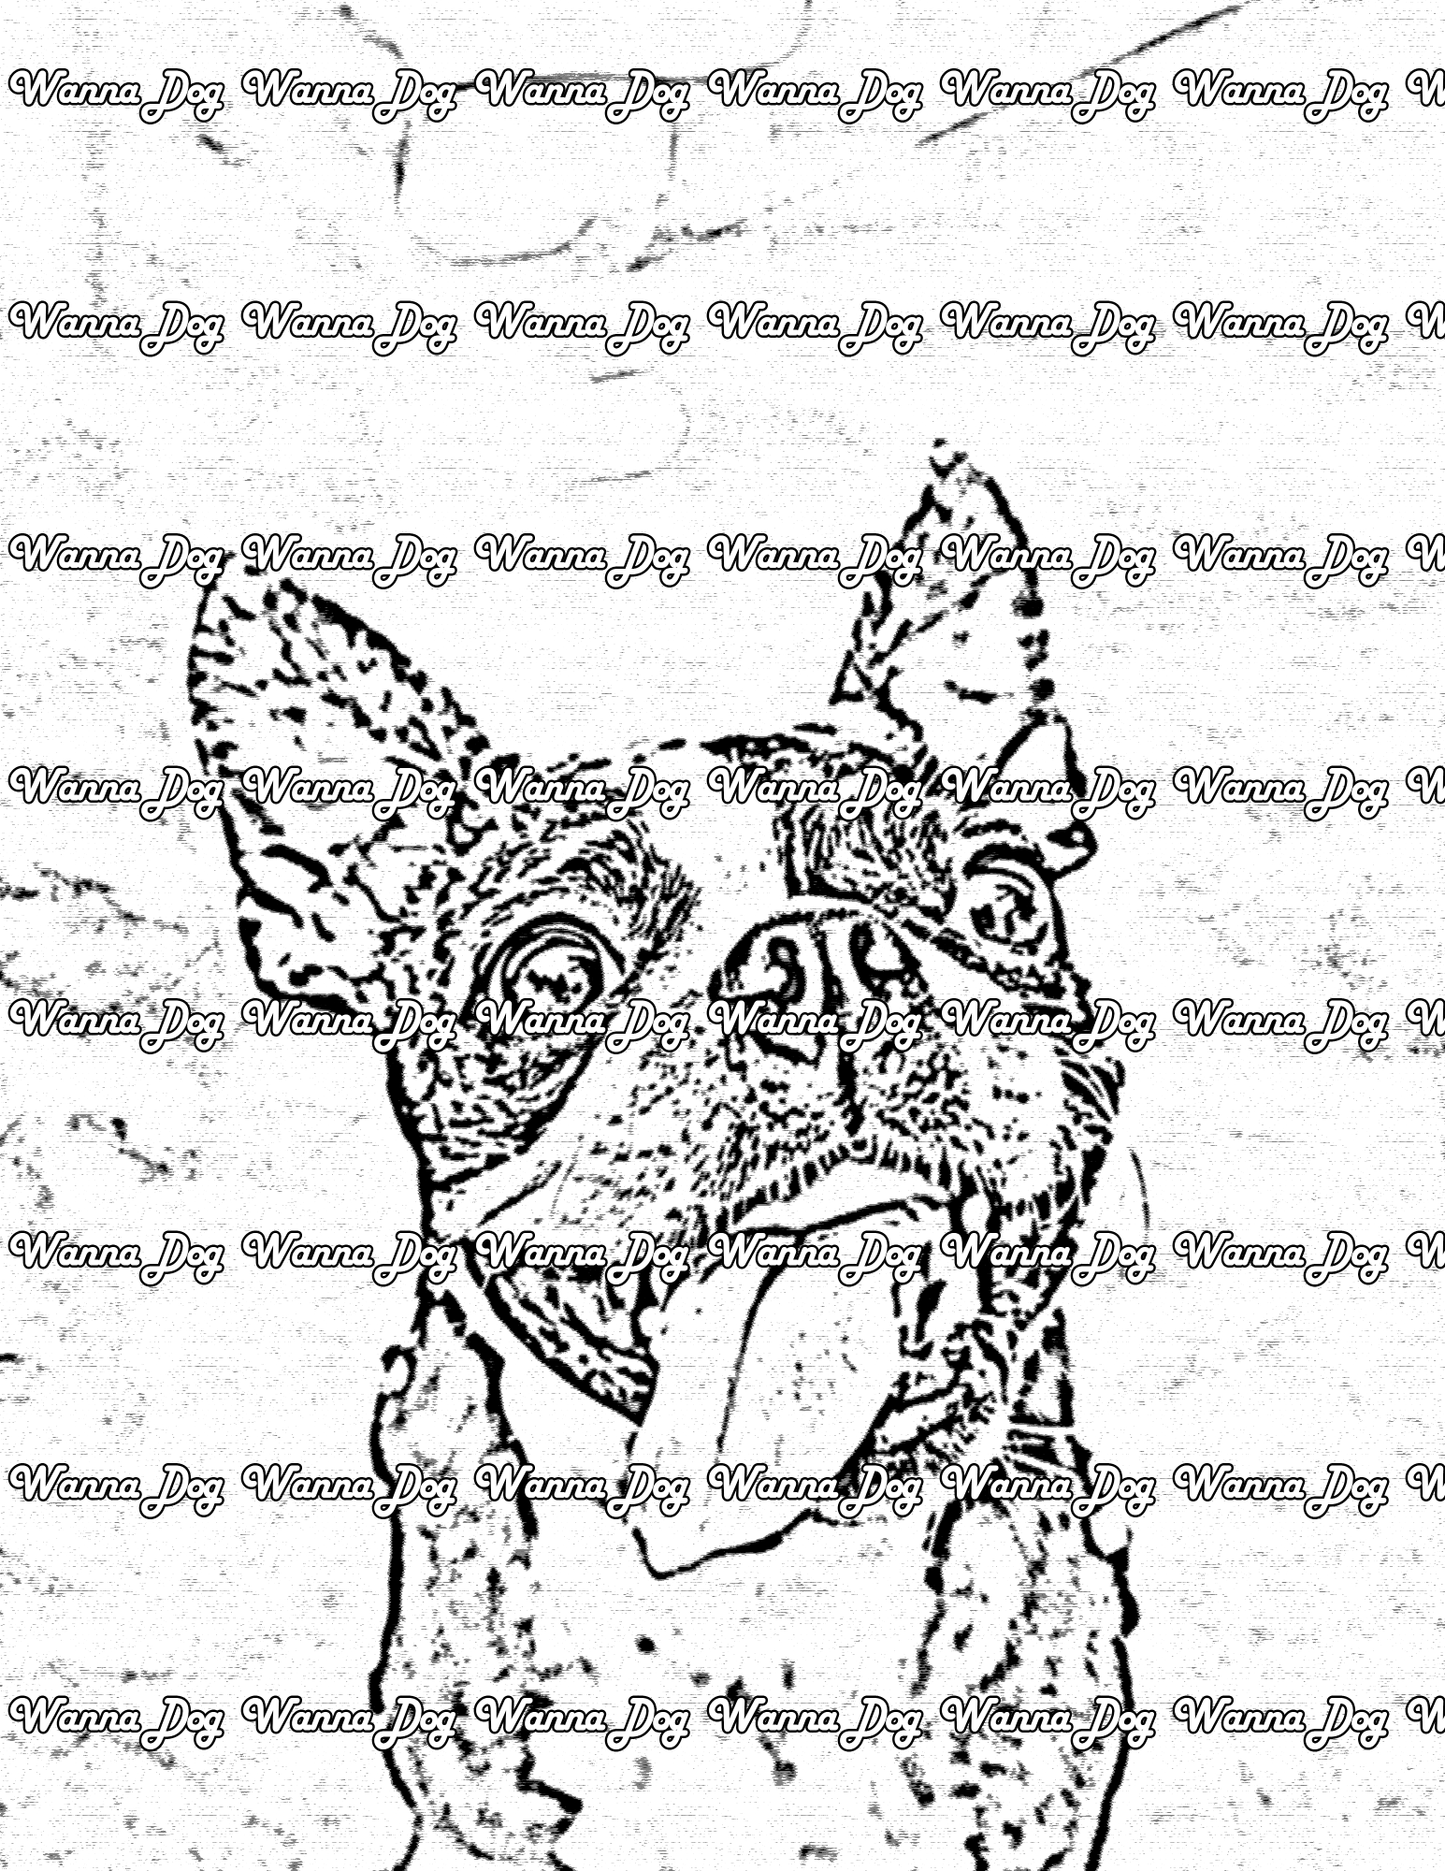 Boston Terrier Coloring Page of a Boston Terrier on a walk with their tongue out